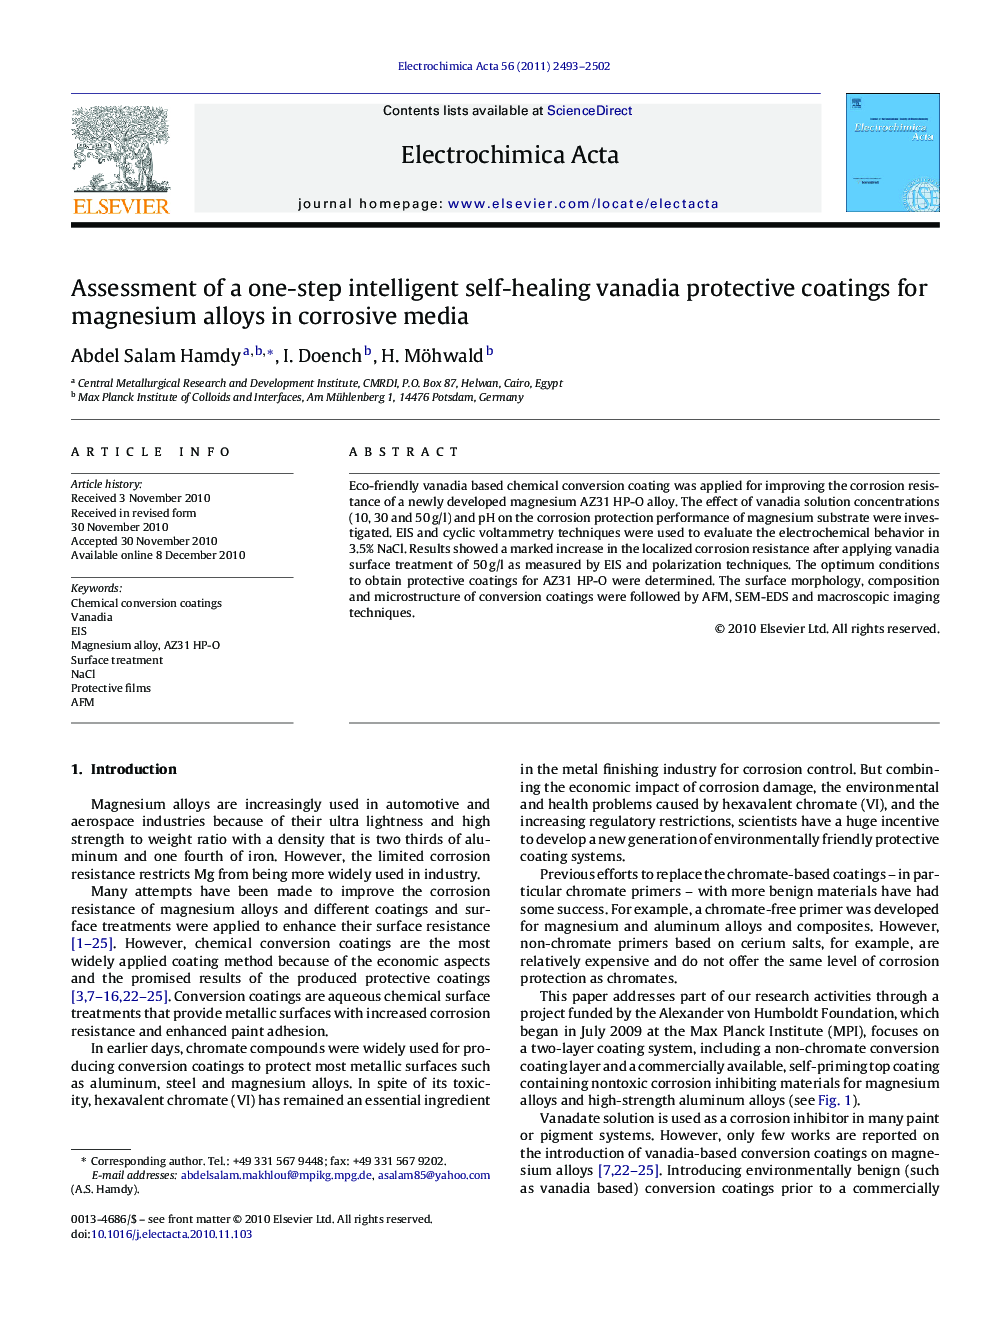 Assessment of a one-step intelligent self-healing vanadia protective coatings for magnesium alloys in corrosive media